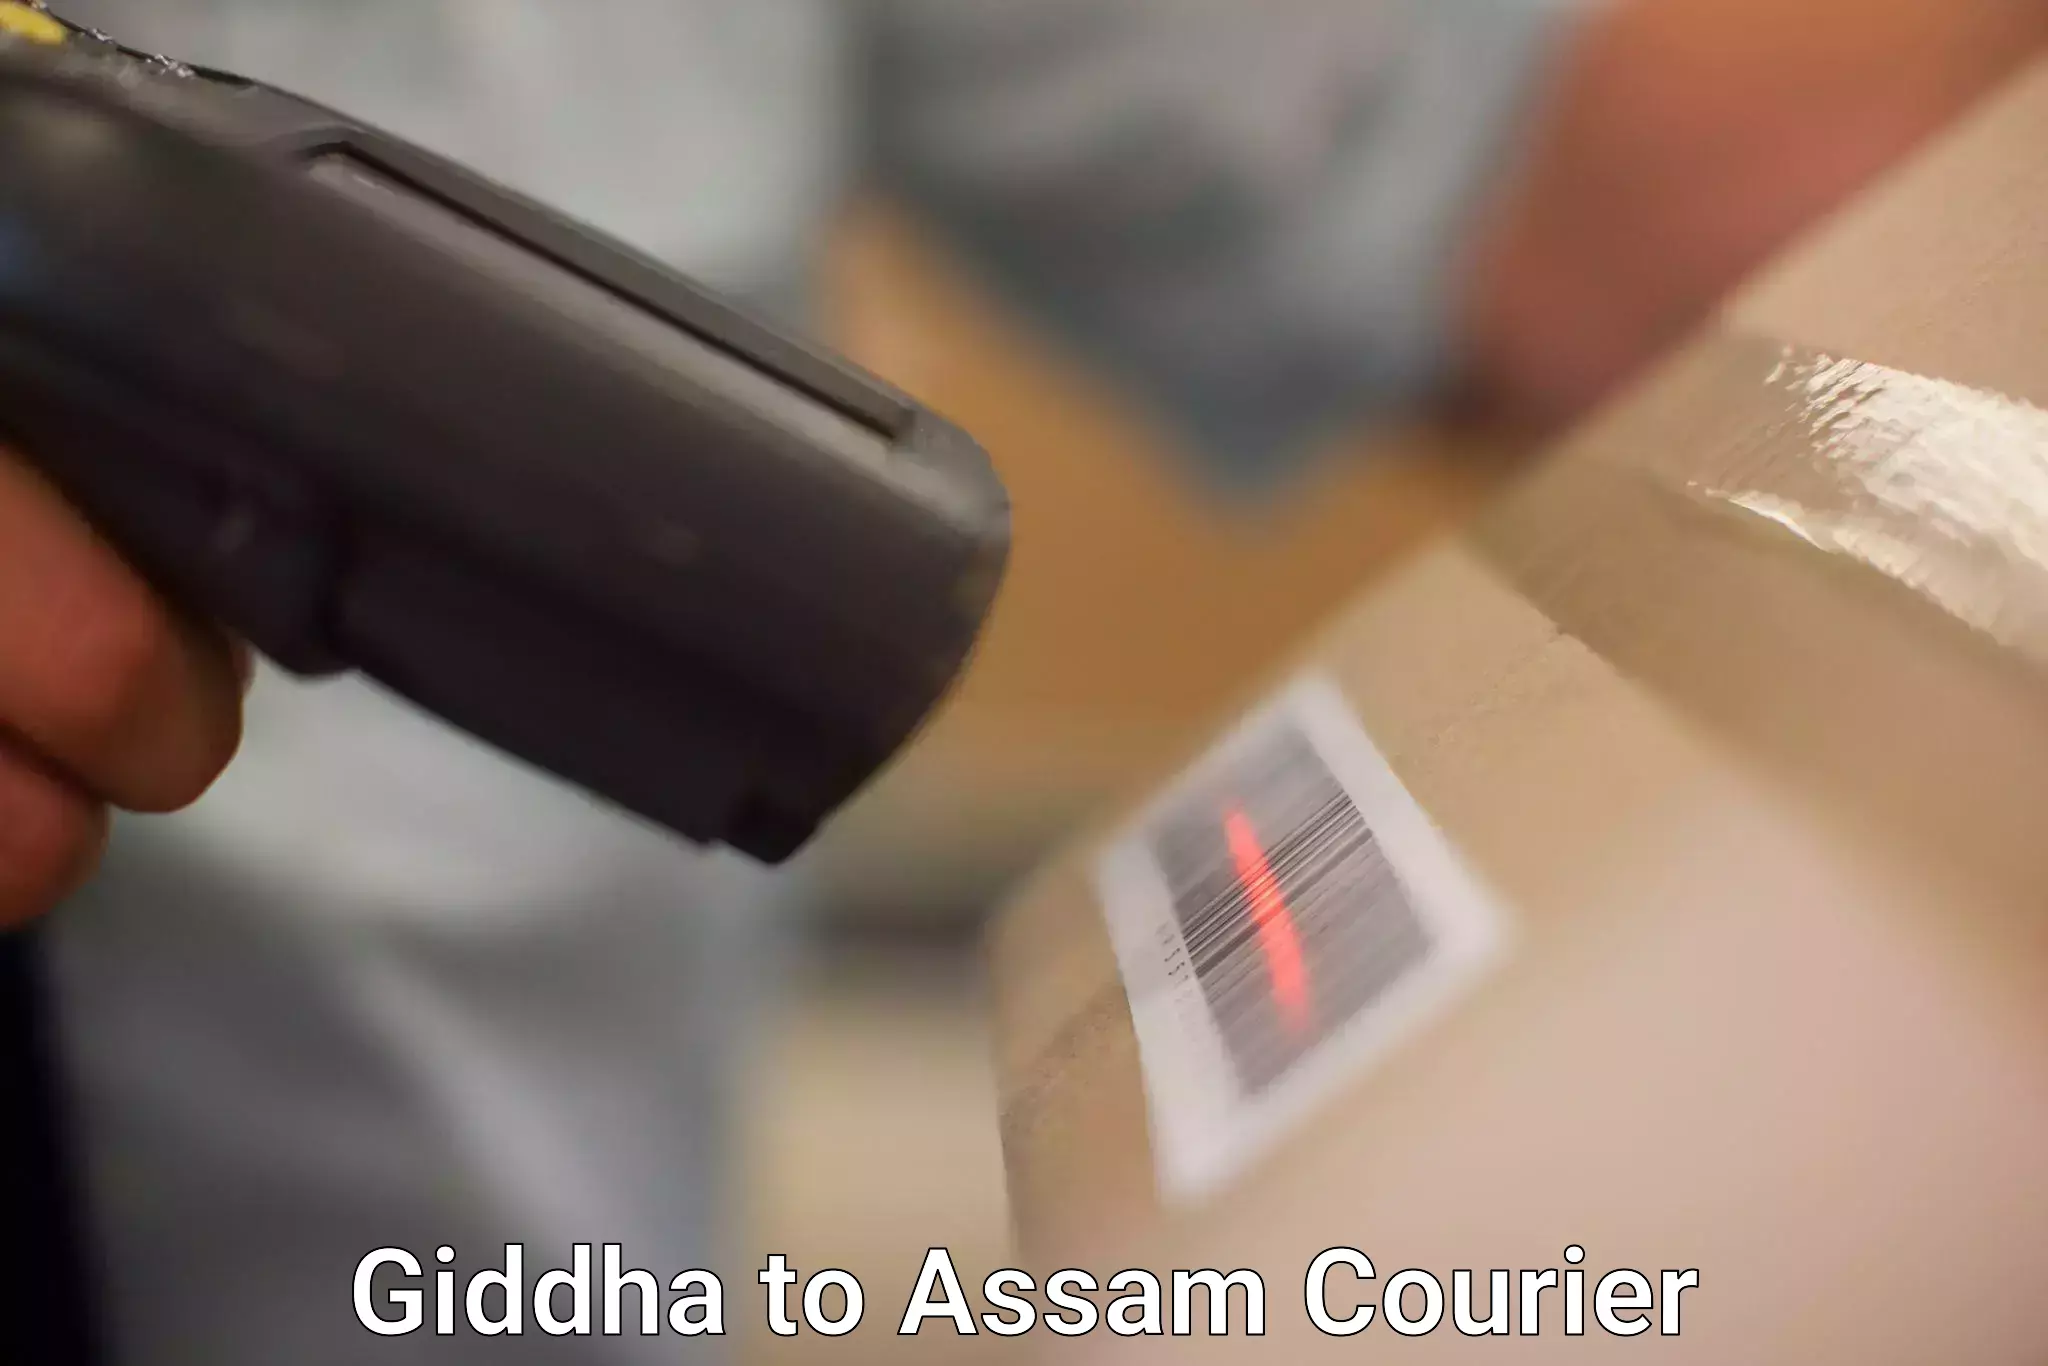 Courier service innovation in Giddha to Dergaon